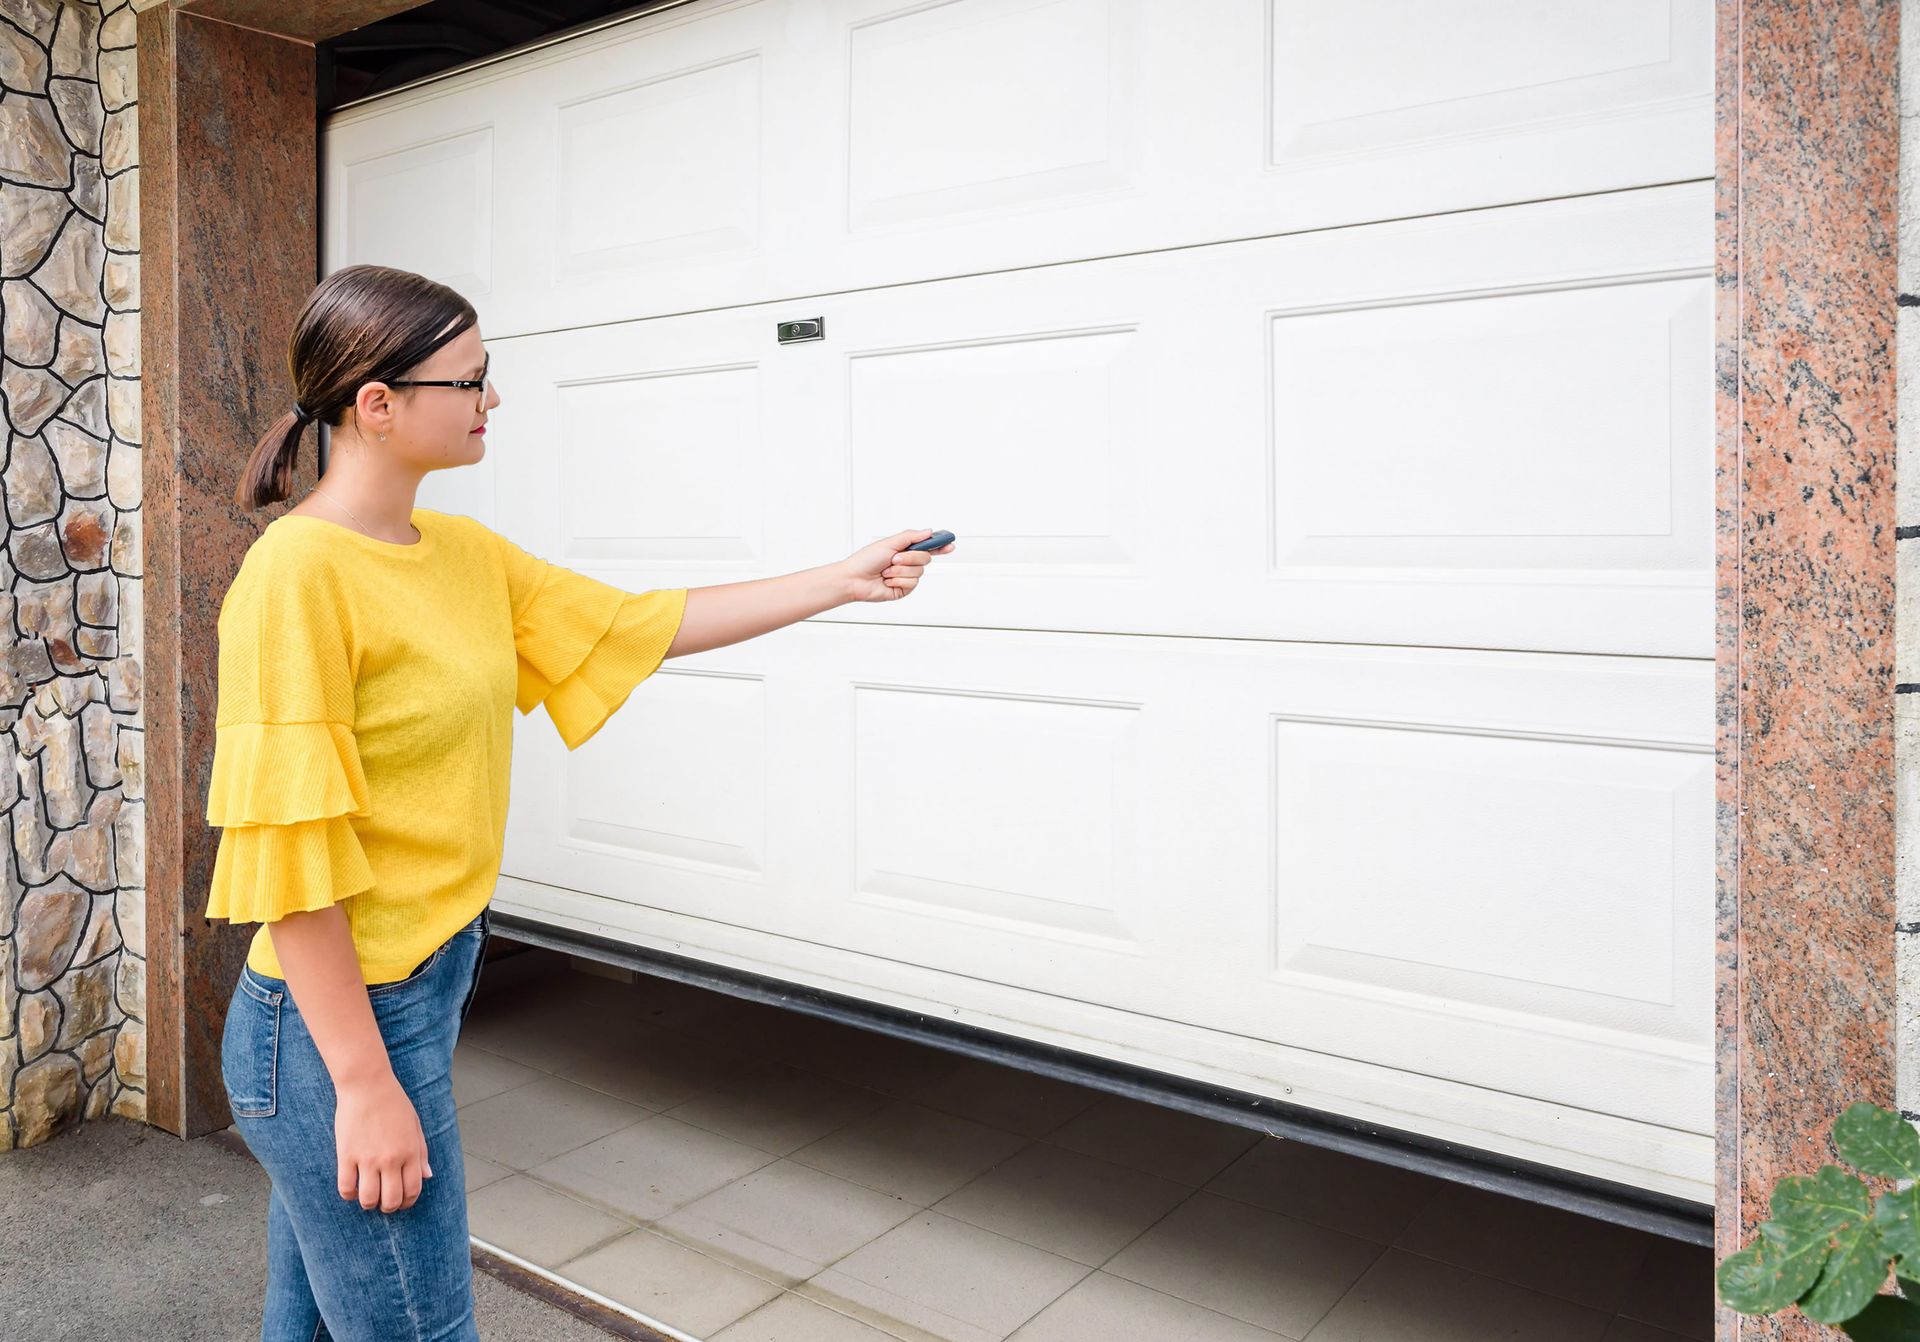 A Woman in A Yellow Shirt Is Using a Remote Control to Open a Garage Door - Rochester Hills, MI - J & B Doors